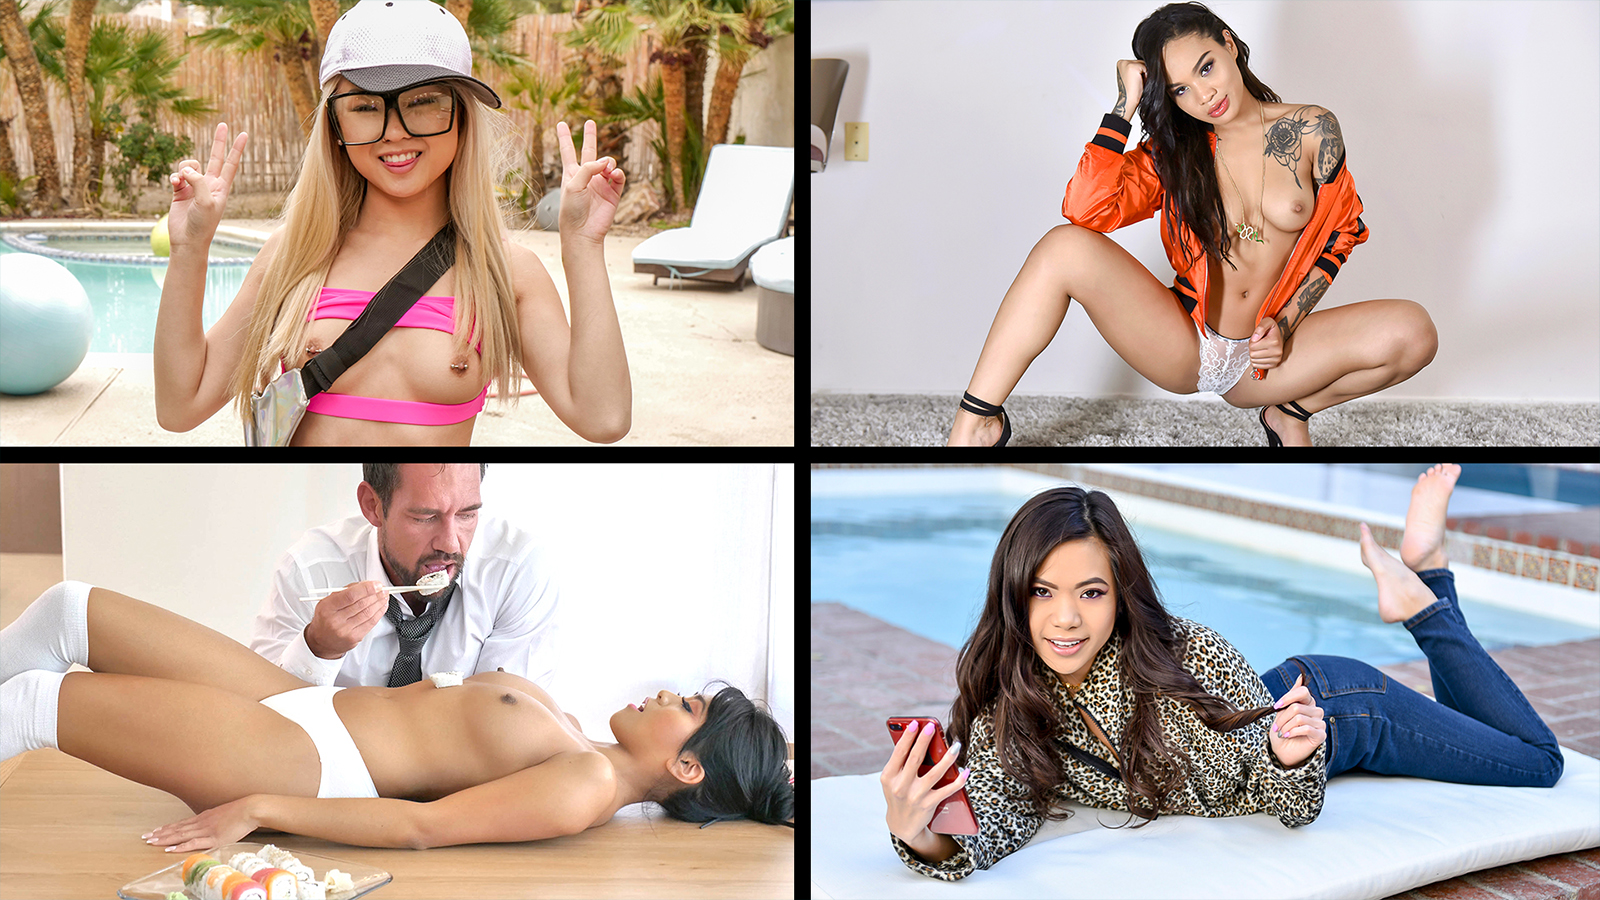 1080p Porn Compilation - Team Skeet Selects - Little Asian Cuties Compilation [1080p] Â» Sexuria  Download Porn Release for Free